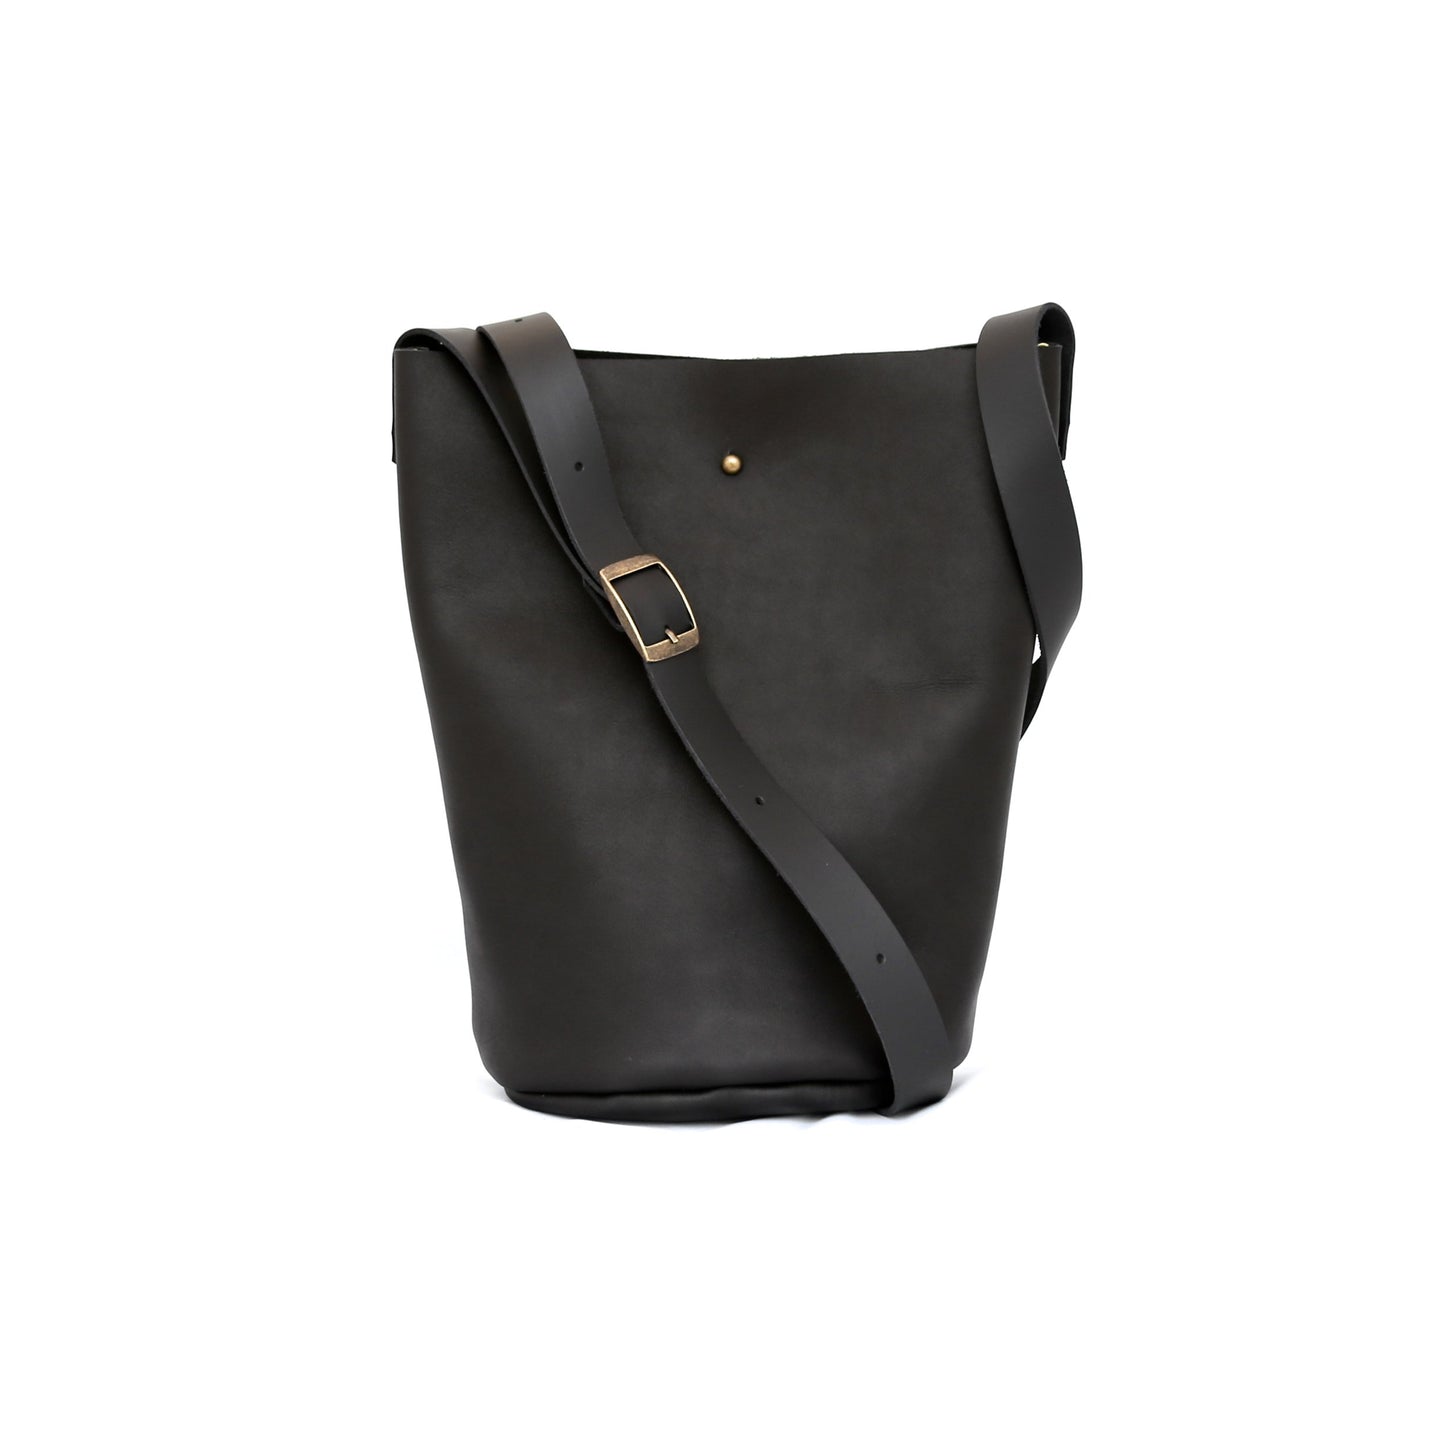 Bucket Bag Leather - handcrafted by Market Canvas Leather in Tofino, BC, Canada